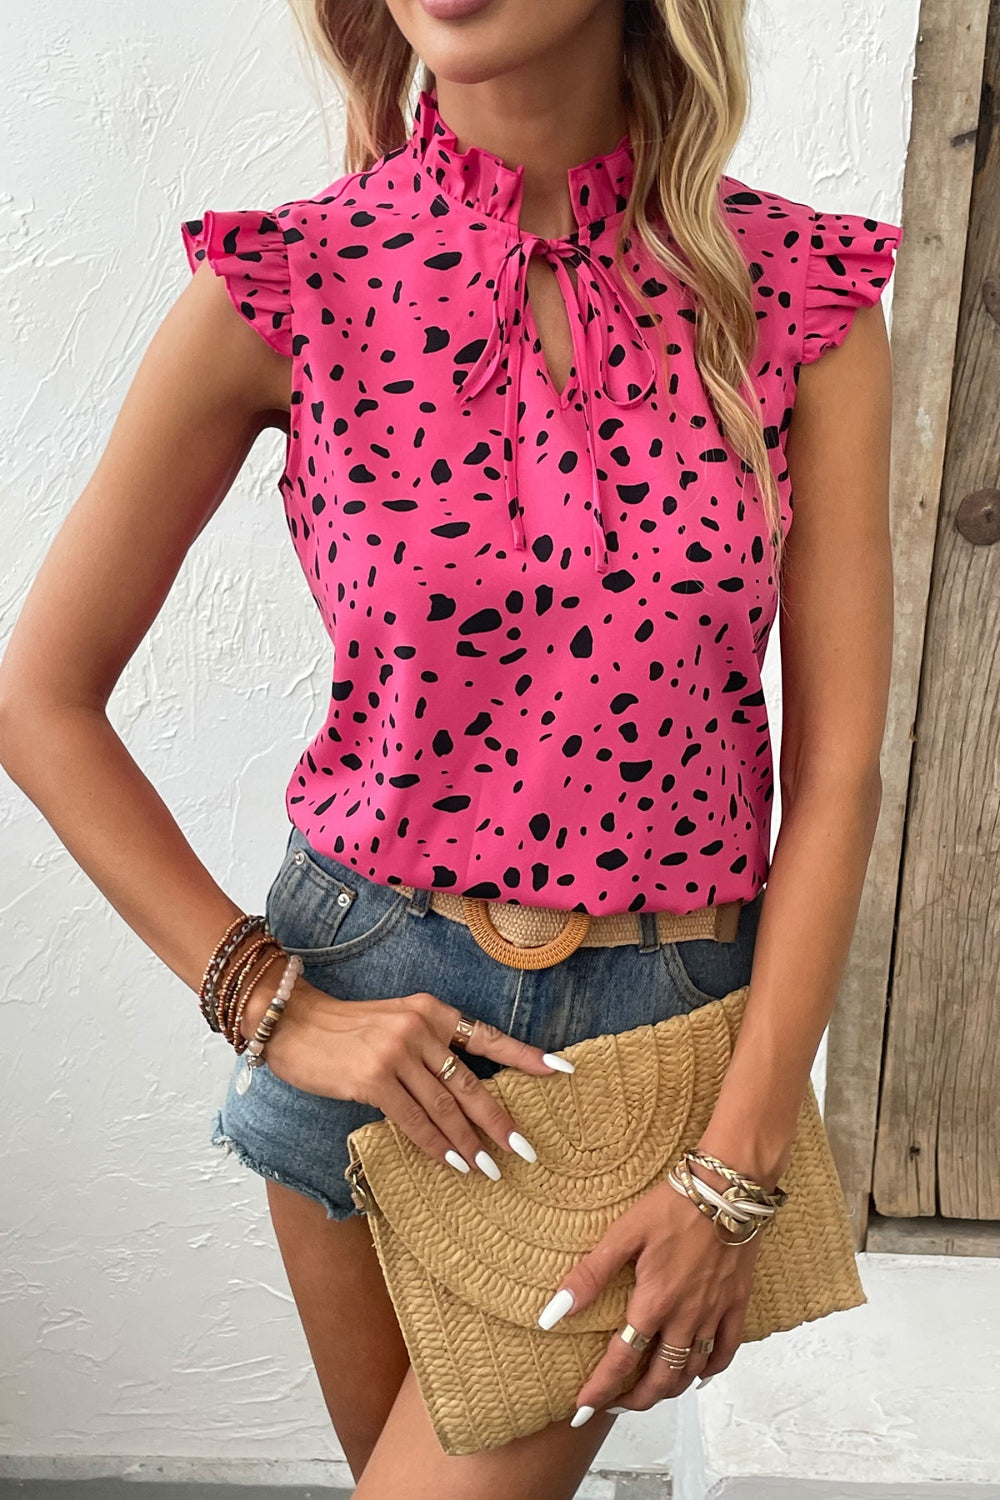 Chic fuchsia tie-neck blouse with playful prints, perfect for summer. Flattering fit, easy to style, and breezy for warm days